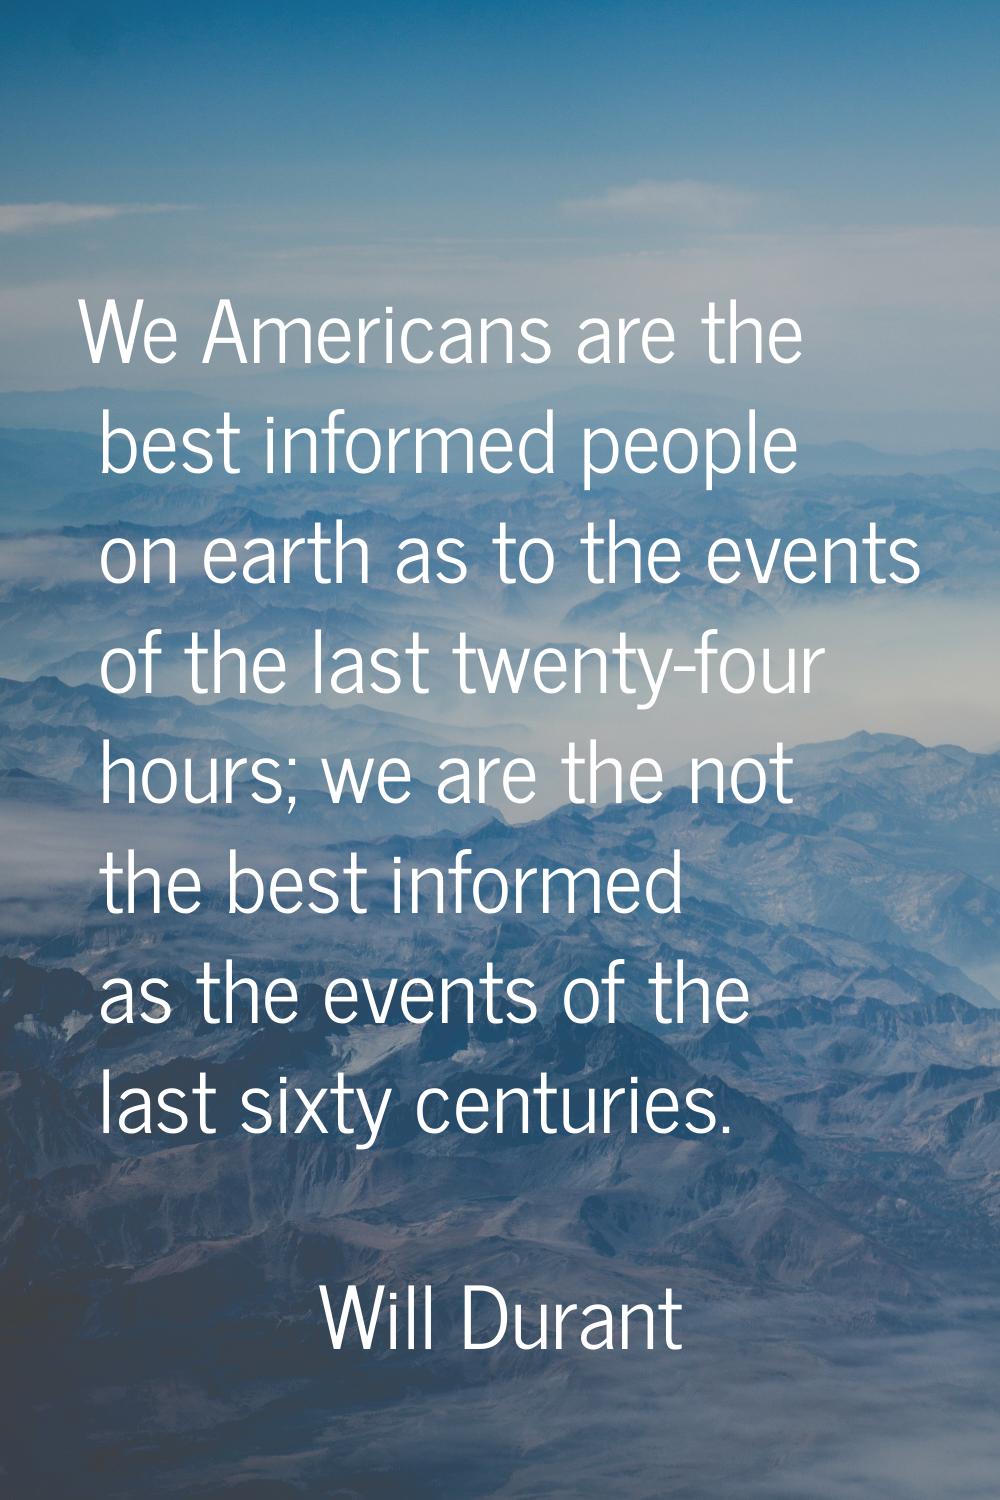 We Americans are the best informed people on earth as to the events of the last twenty-four hours; 